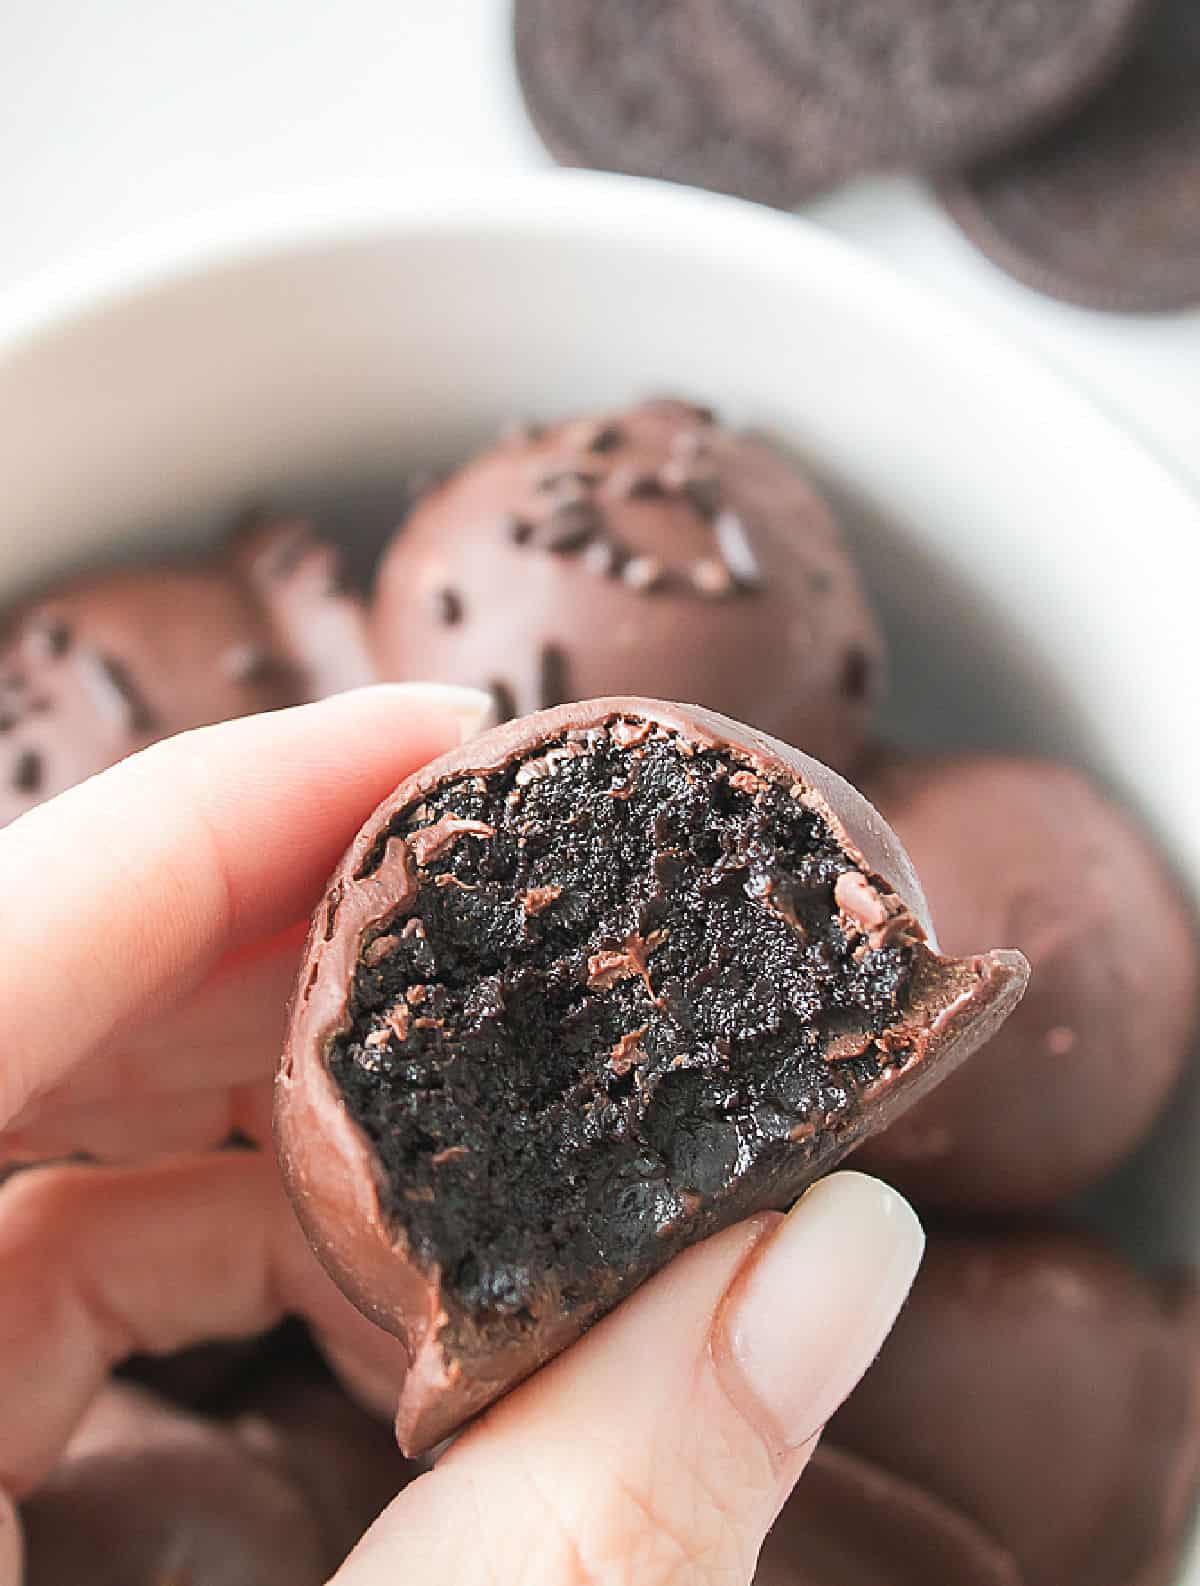 Hand holding a bitten Oreo truffle over a white bowl with more truffles.